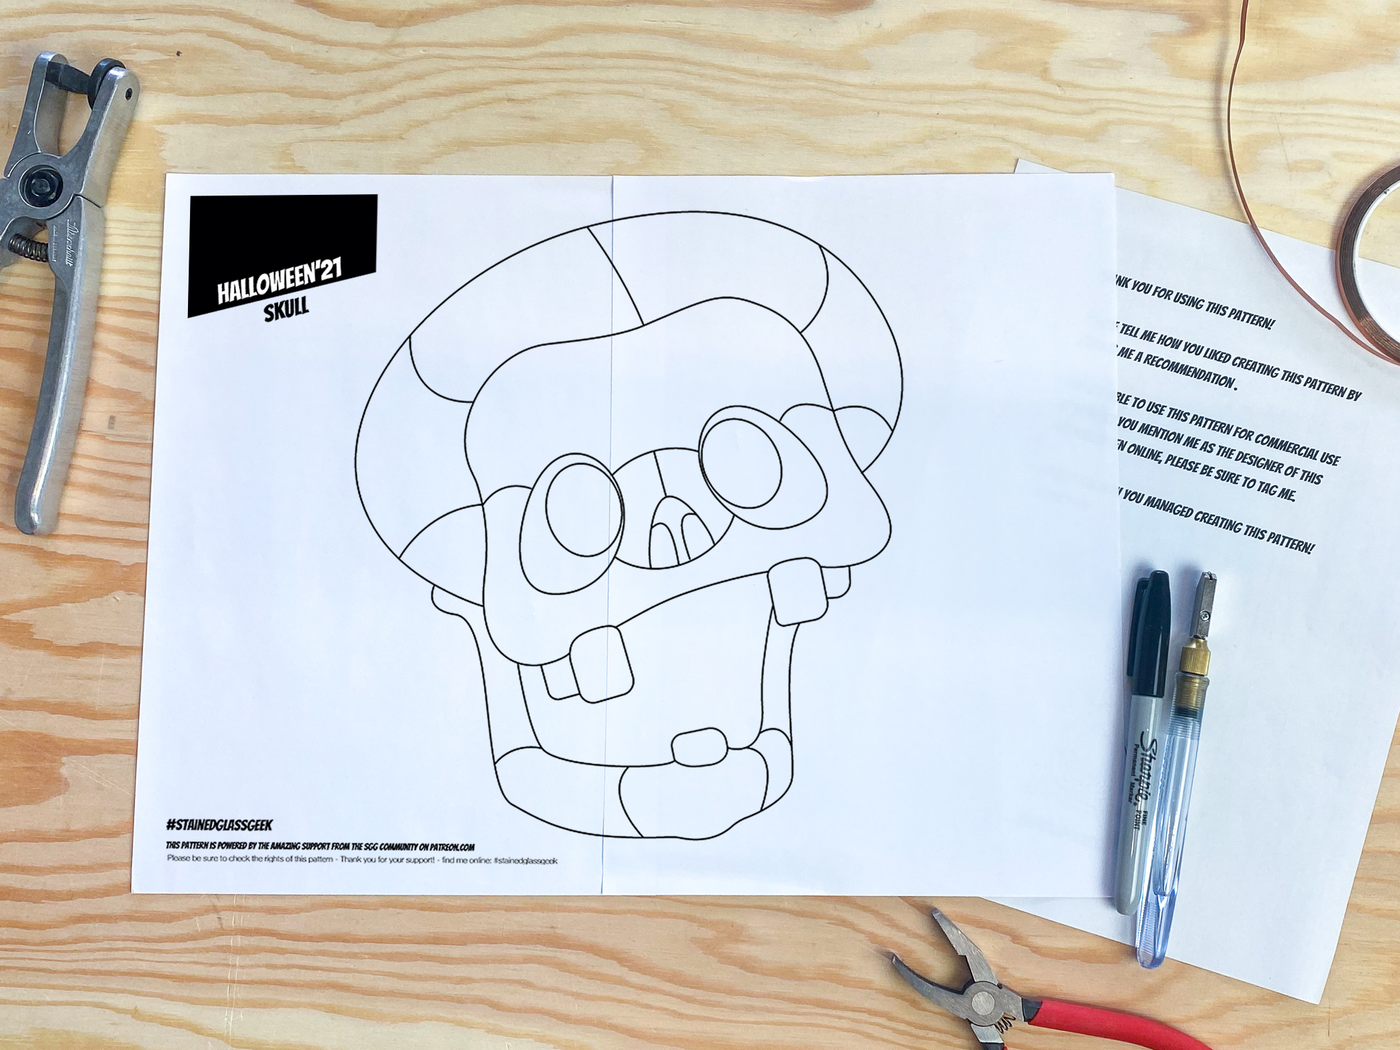 Halloween Skull (2021) Stained Glass Pattern